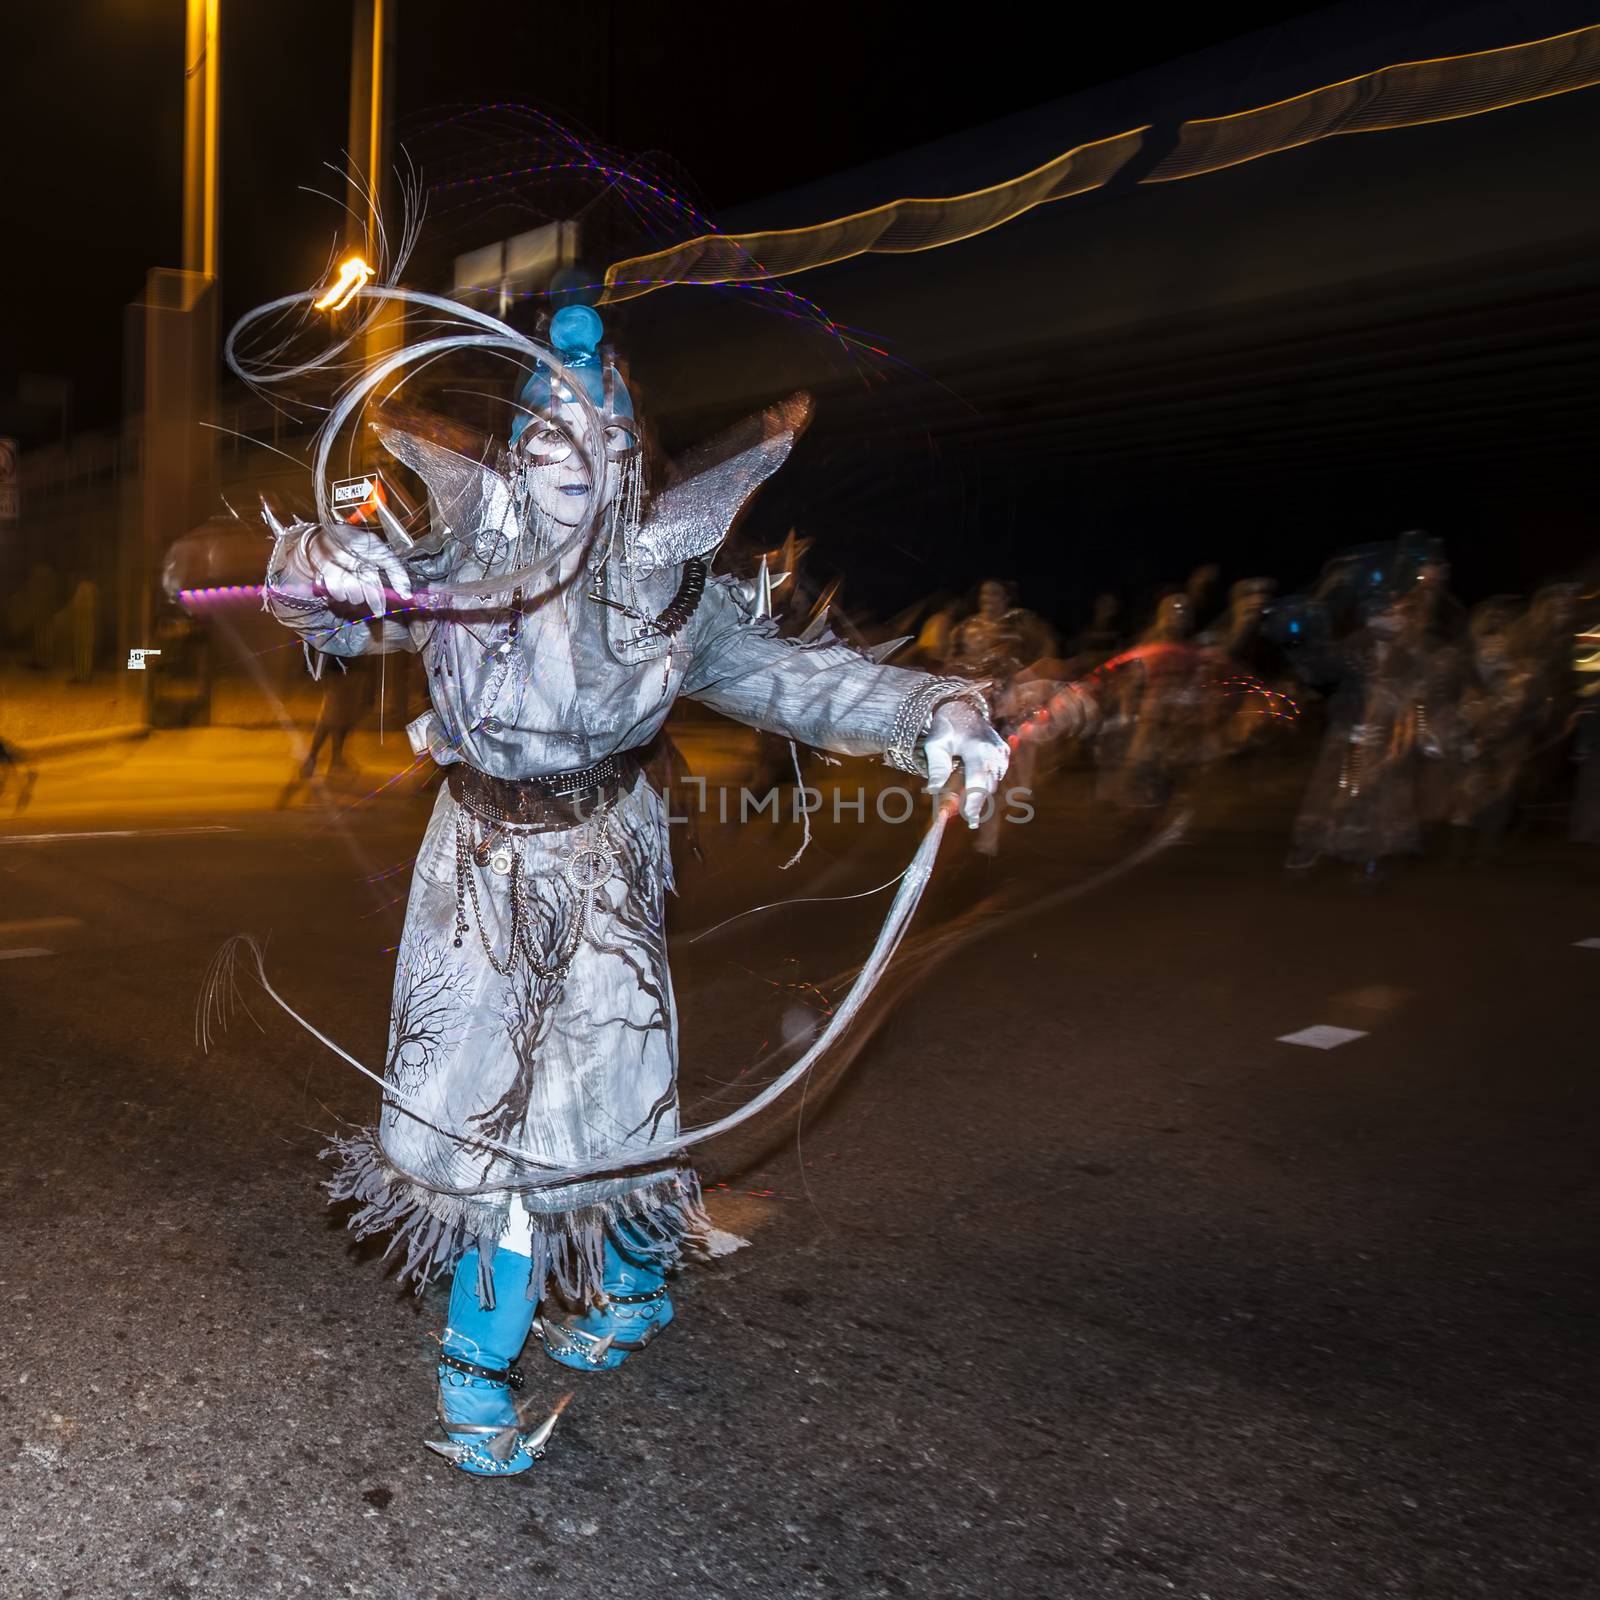 TUCSON, AZ/USA - NOVEMBER 09: Unidentified performer in silver at the All Souls Procession on November 09, 2014 in Tucson, AZ, USA.